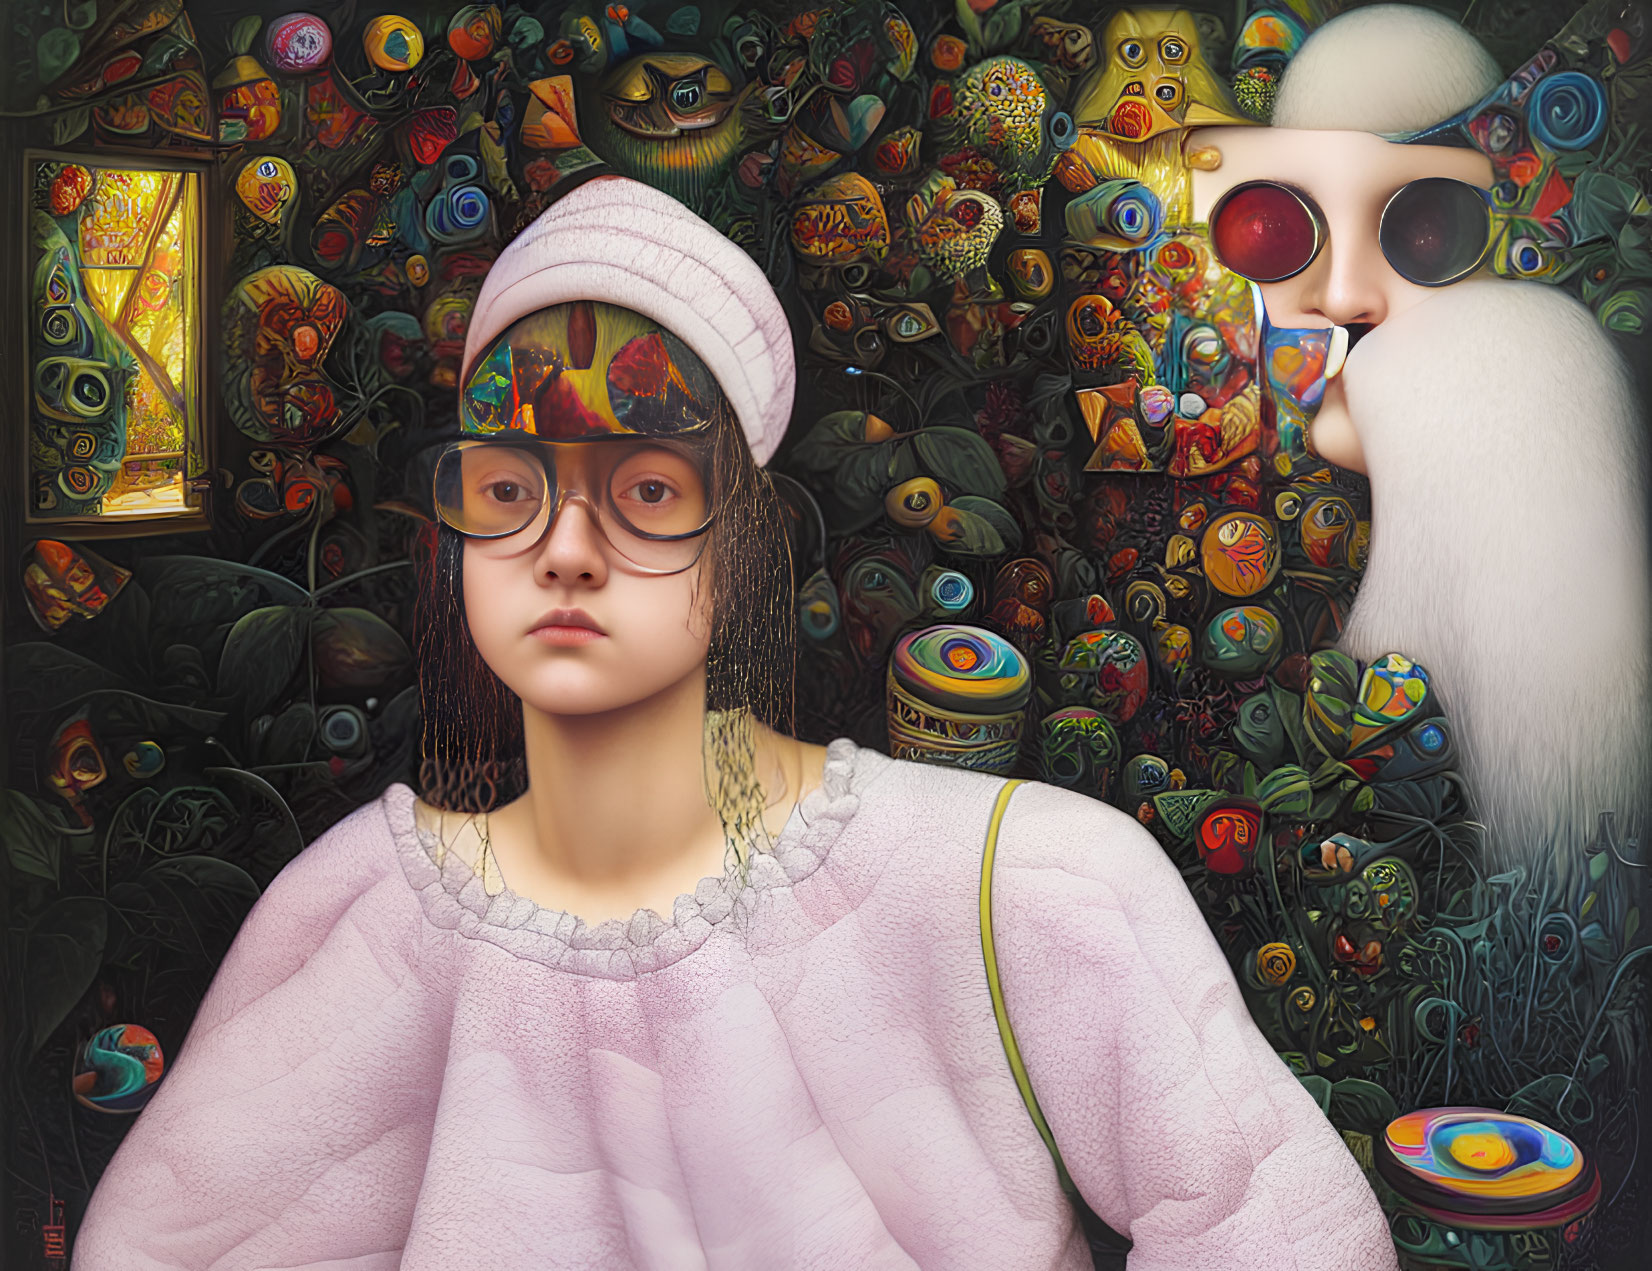 Colorful Surreal Artwork: Young Girl with Glasses and Eye-Covered Entities